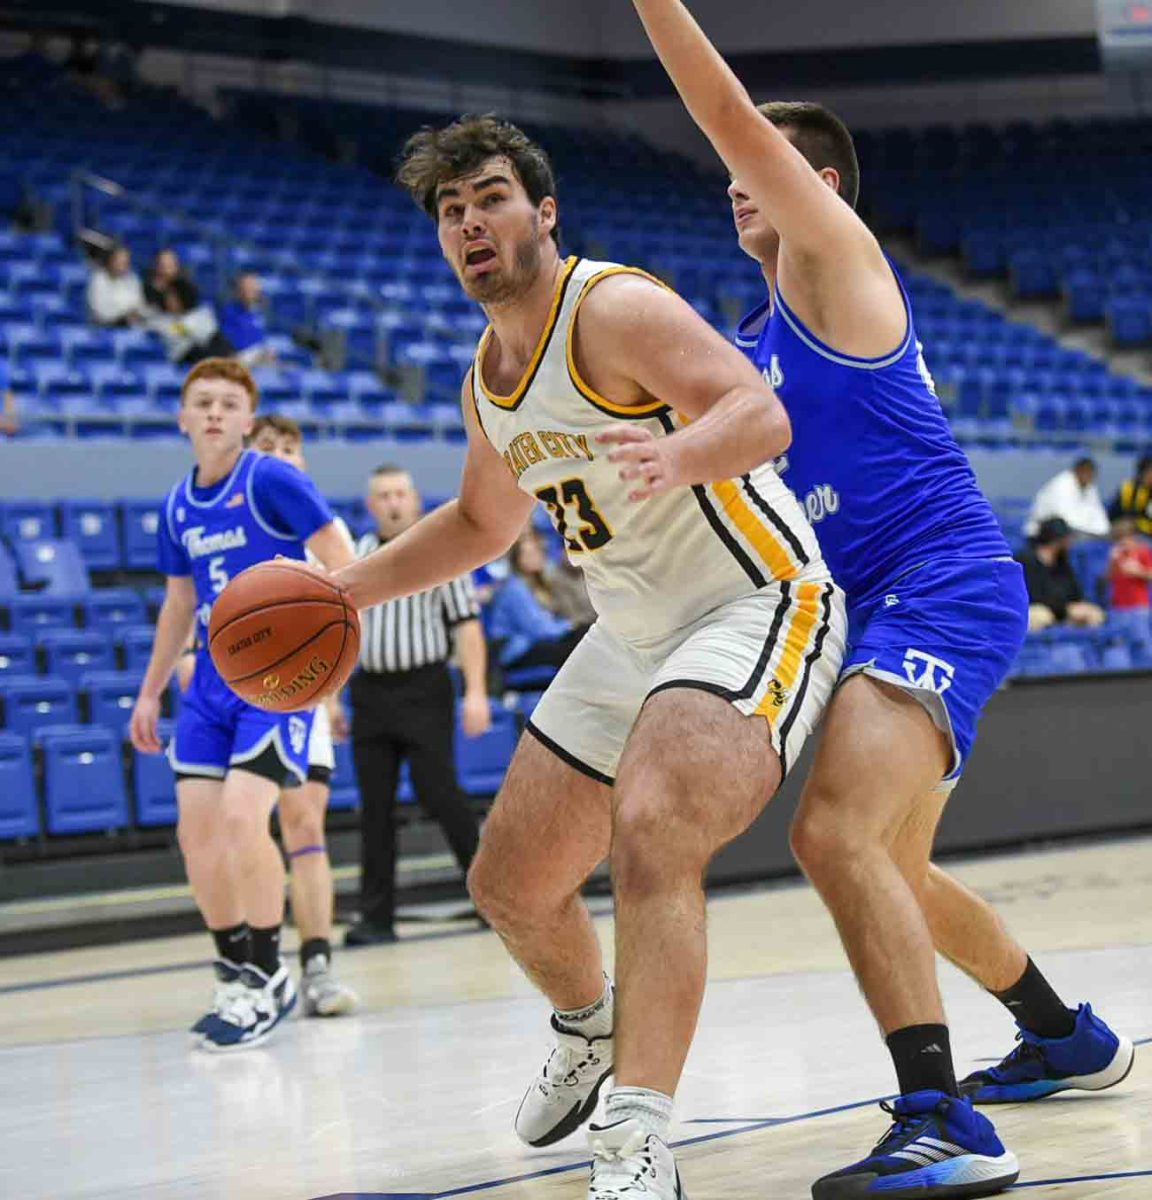 Middlesboro+senior+forward+Trey+King+had+18+points+and+six+rebounds+in+the+Yellow+Jackets+win+over+Thomas+Walker%2C+Va.%2C+on+Saturday+at+Lincoln+Memorial+University.